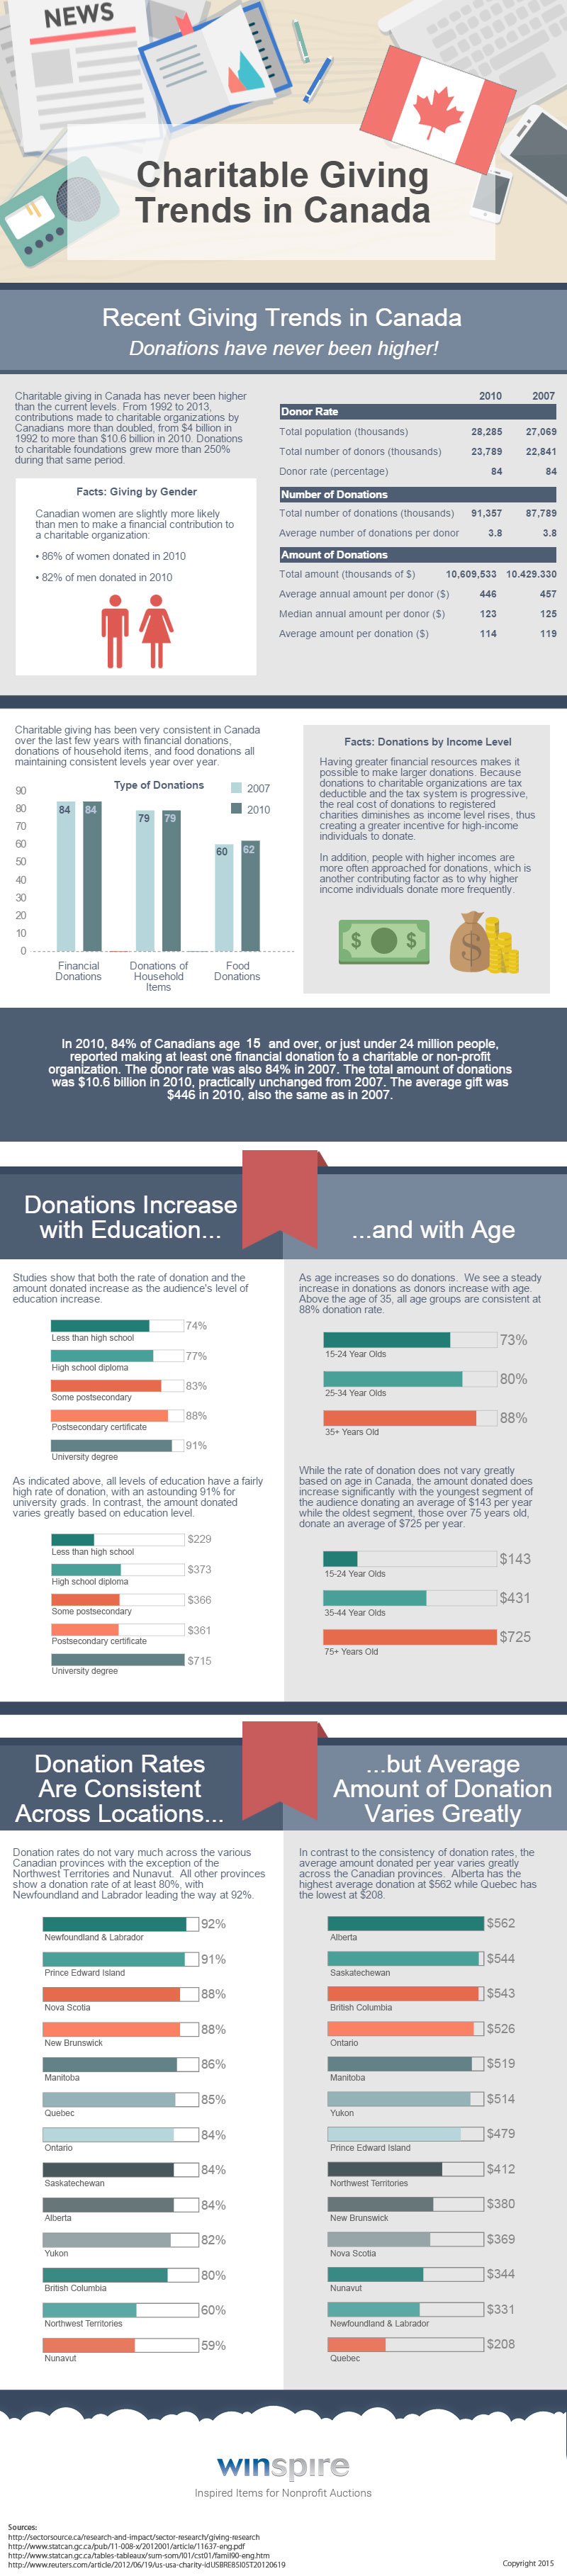 Winspire-Charitable-Giving-Statistics-Canada-Infographic